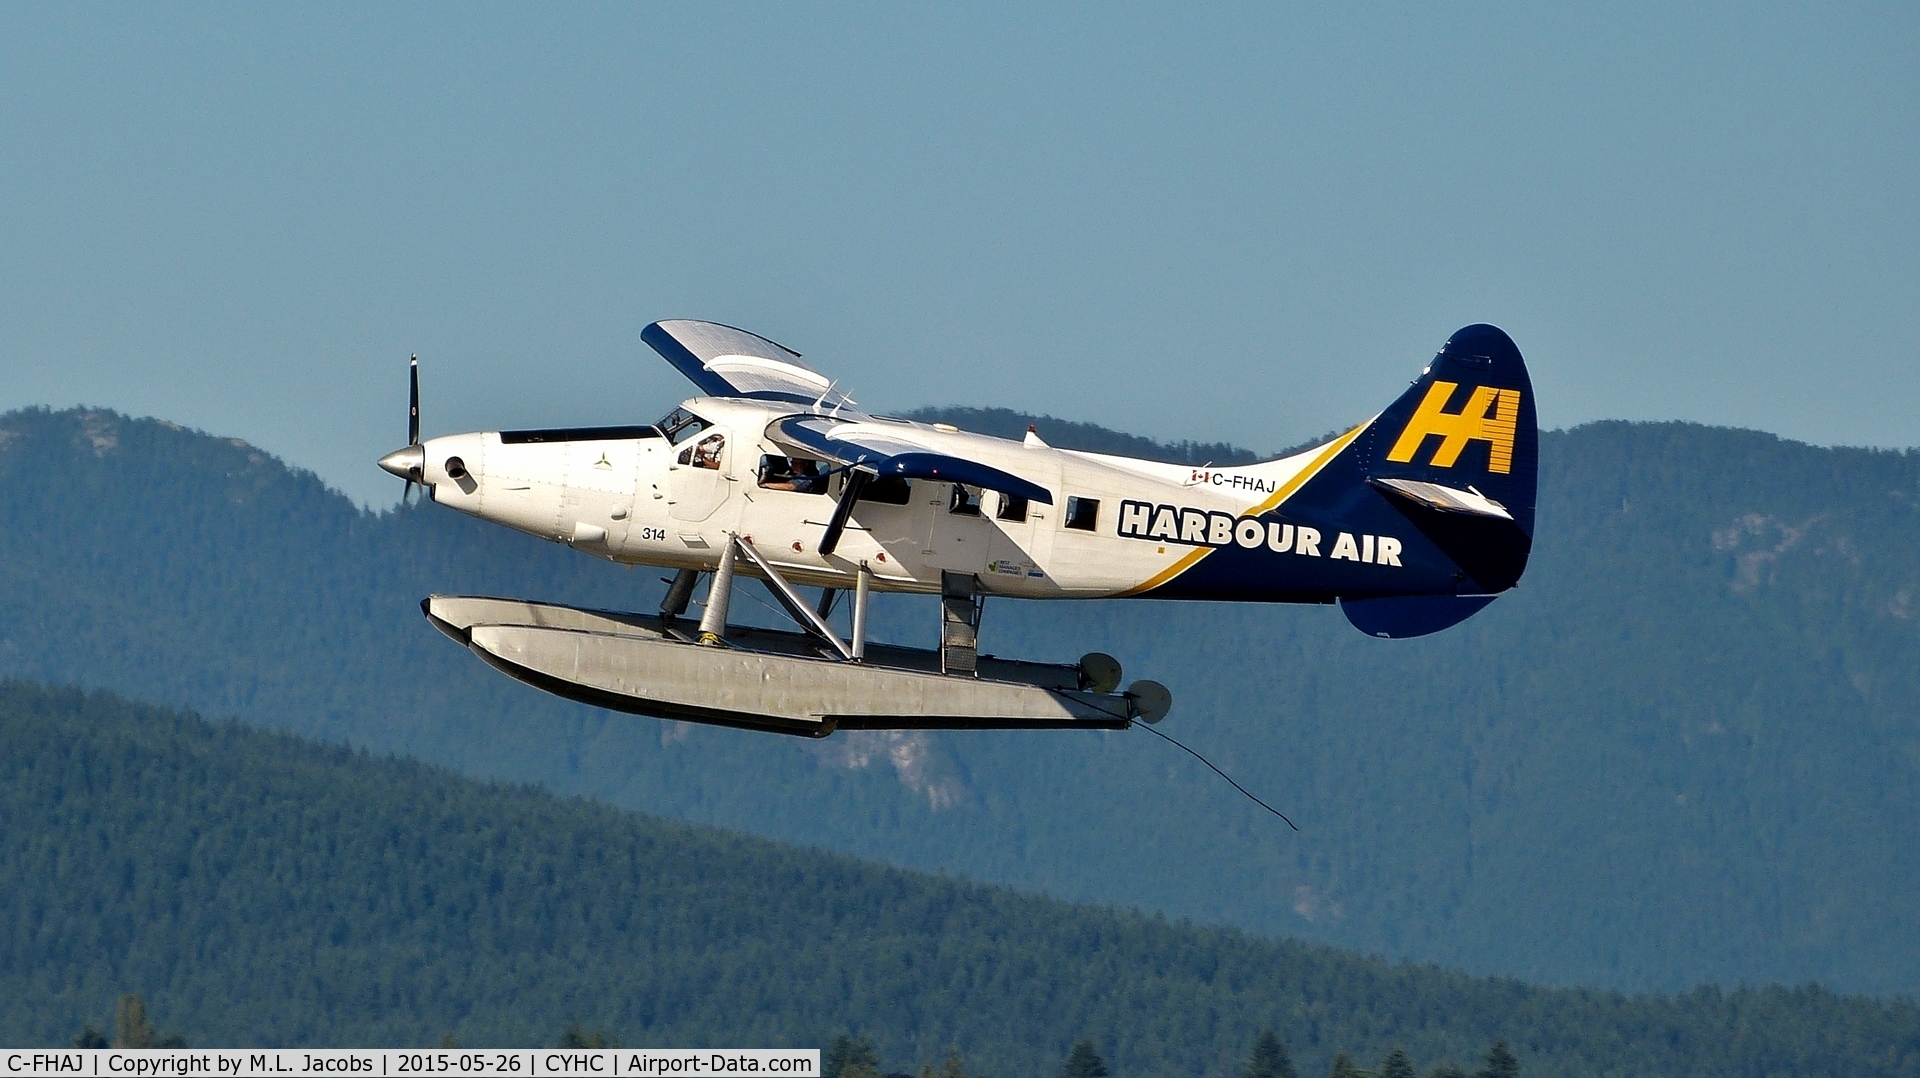 C-FHAJ, 2001 De Havilland Canada DHC-3 Otter C/N 408, Harbour Air #314 early evening departure from Coal Harbour.